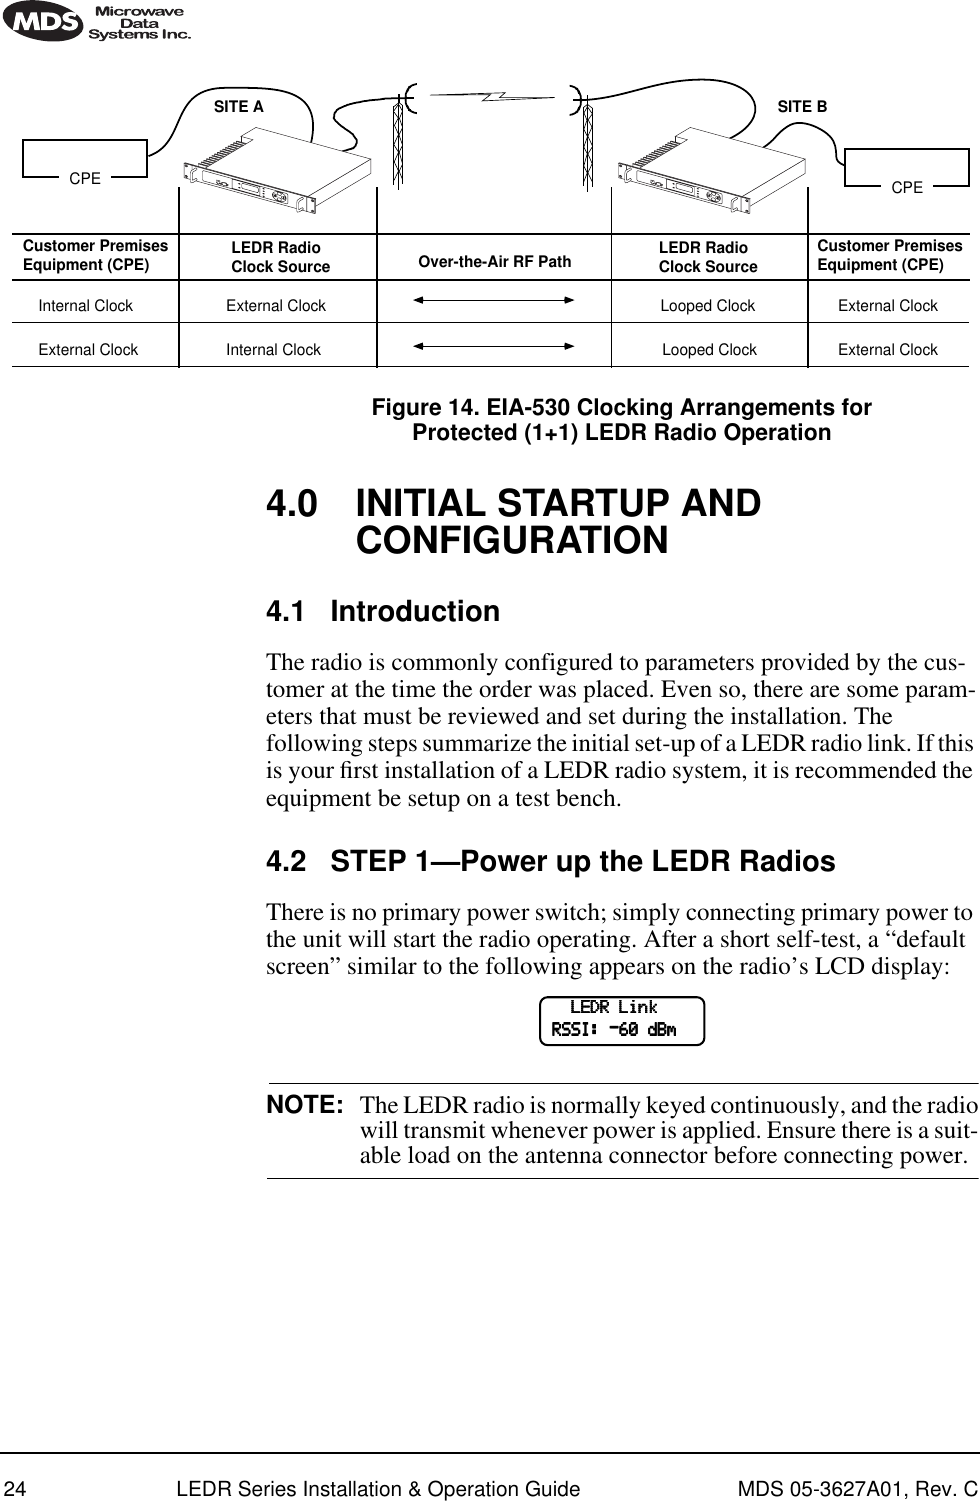 24 LEDR Series Installation &amp; Operation Guide MDS 05-3627A01, Rev. CFigure 14. EIA-530 Clocking Arrangements for Protected (1+1) LEDR Radio Operation4.0 INITIAL STARTUP AND CONFIGURATION4.1 IntroductionThe radio is commonly configured to parameters provided by the cus-tomer at the time the order was placed. Even so, there are some param-eters that must be reviewed and set during the installation. The following steps summarize the initial set-up of a LEDR radio link. If this is your ﬁrst installation of a LEDR radio system, it is recommended the equipment be setup on a test bench.4.2 STEP 1—Power up the LEDR RadiosThere is no primary power switch; simply connecting primary power to the unit will start the radio operating. After a short self-test, a “default screen” similar to the following appears on the radio’s LCD display:NOTE: The LEDR radio is normally keyed continuously, and the radiowill transmit whenever power is applied. Ensure there is a suit-able load on the antenna connector before connecting power.Over-the-Air RF PathCPECustomer PremisesEquipment (CPE) LEDR RadioClock SourceCPEInternal Clock External Clock Looped Clock External ClockExternal Clock Internal Clock Looped Clock External ClockCustomer PremisesEquipment (CPE)SITE A SITE BLEDR RadioClock Source            LLLLEEEEDDDDRRRR    LLLLiiiinnnnkkkk                    RRRRSSSSSSSSIIII::::    ----66660000    ddddBBBBmmmm